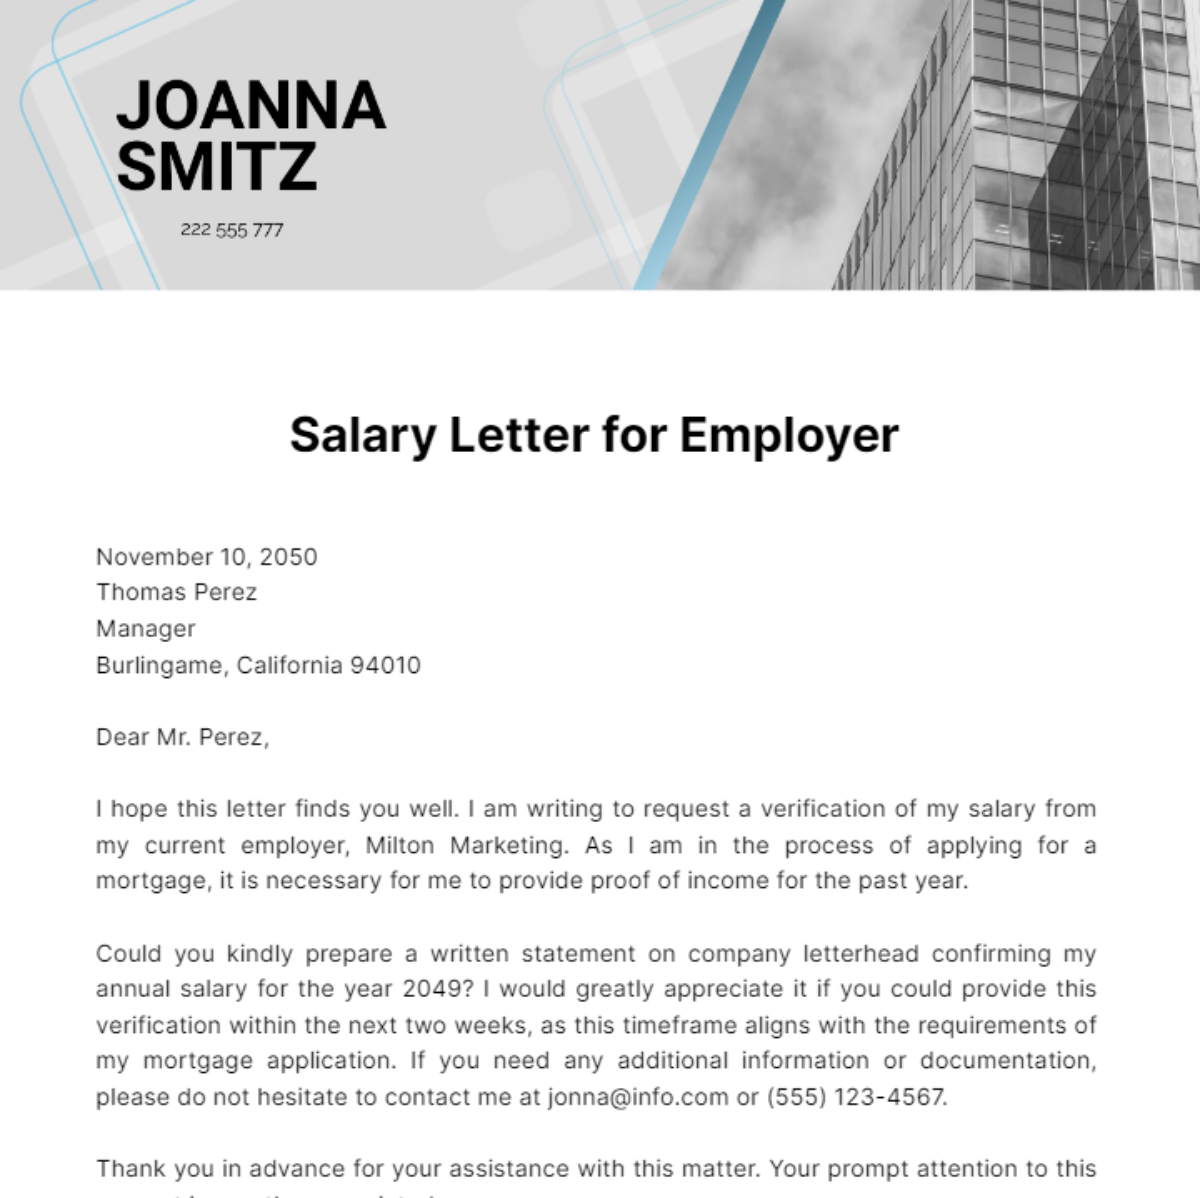 Salary Letter for Employer Template